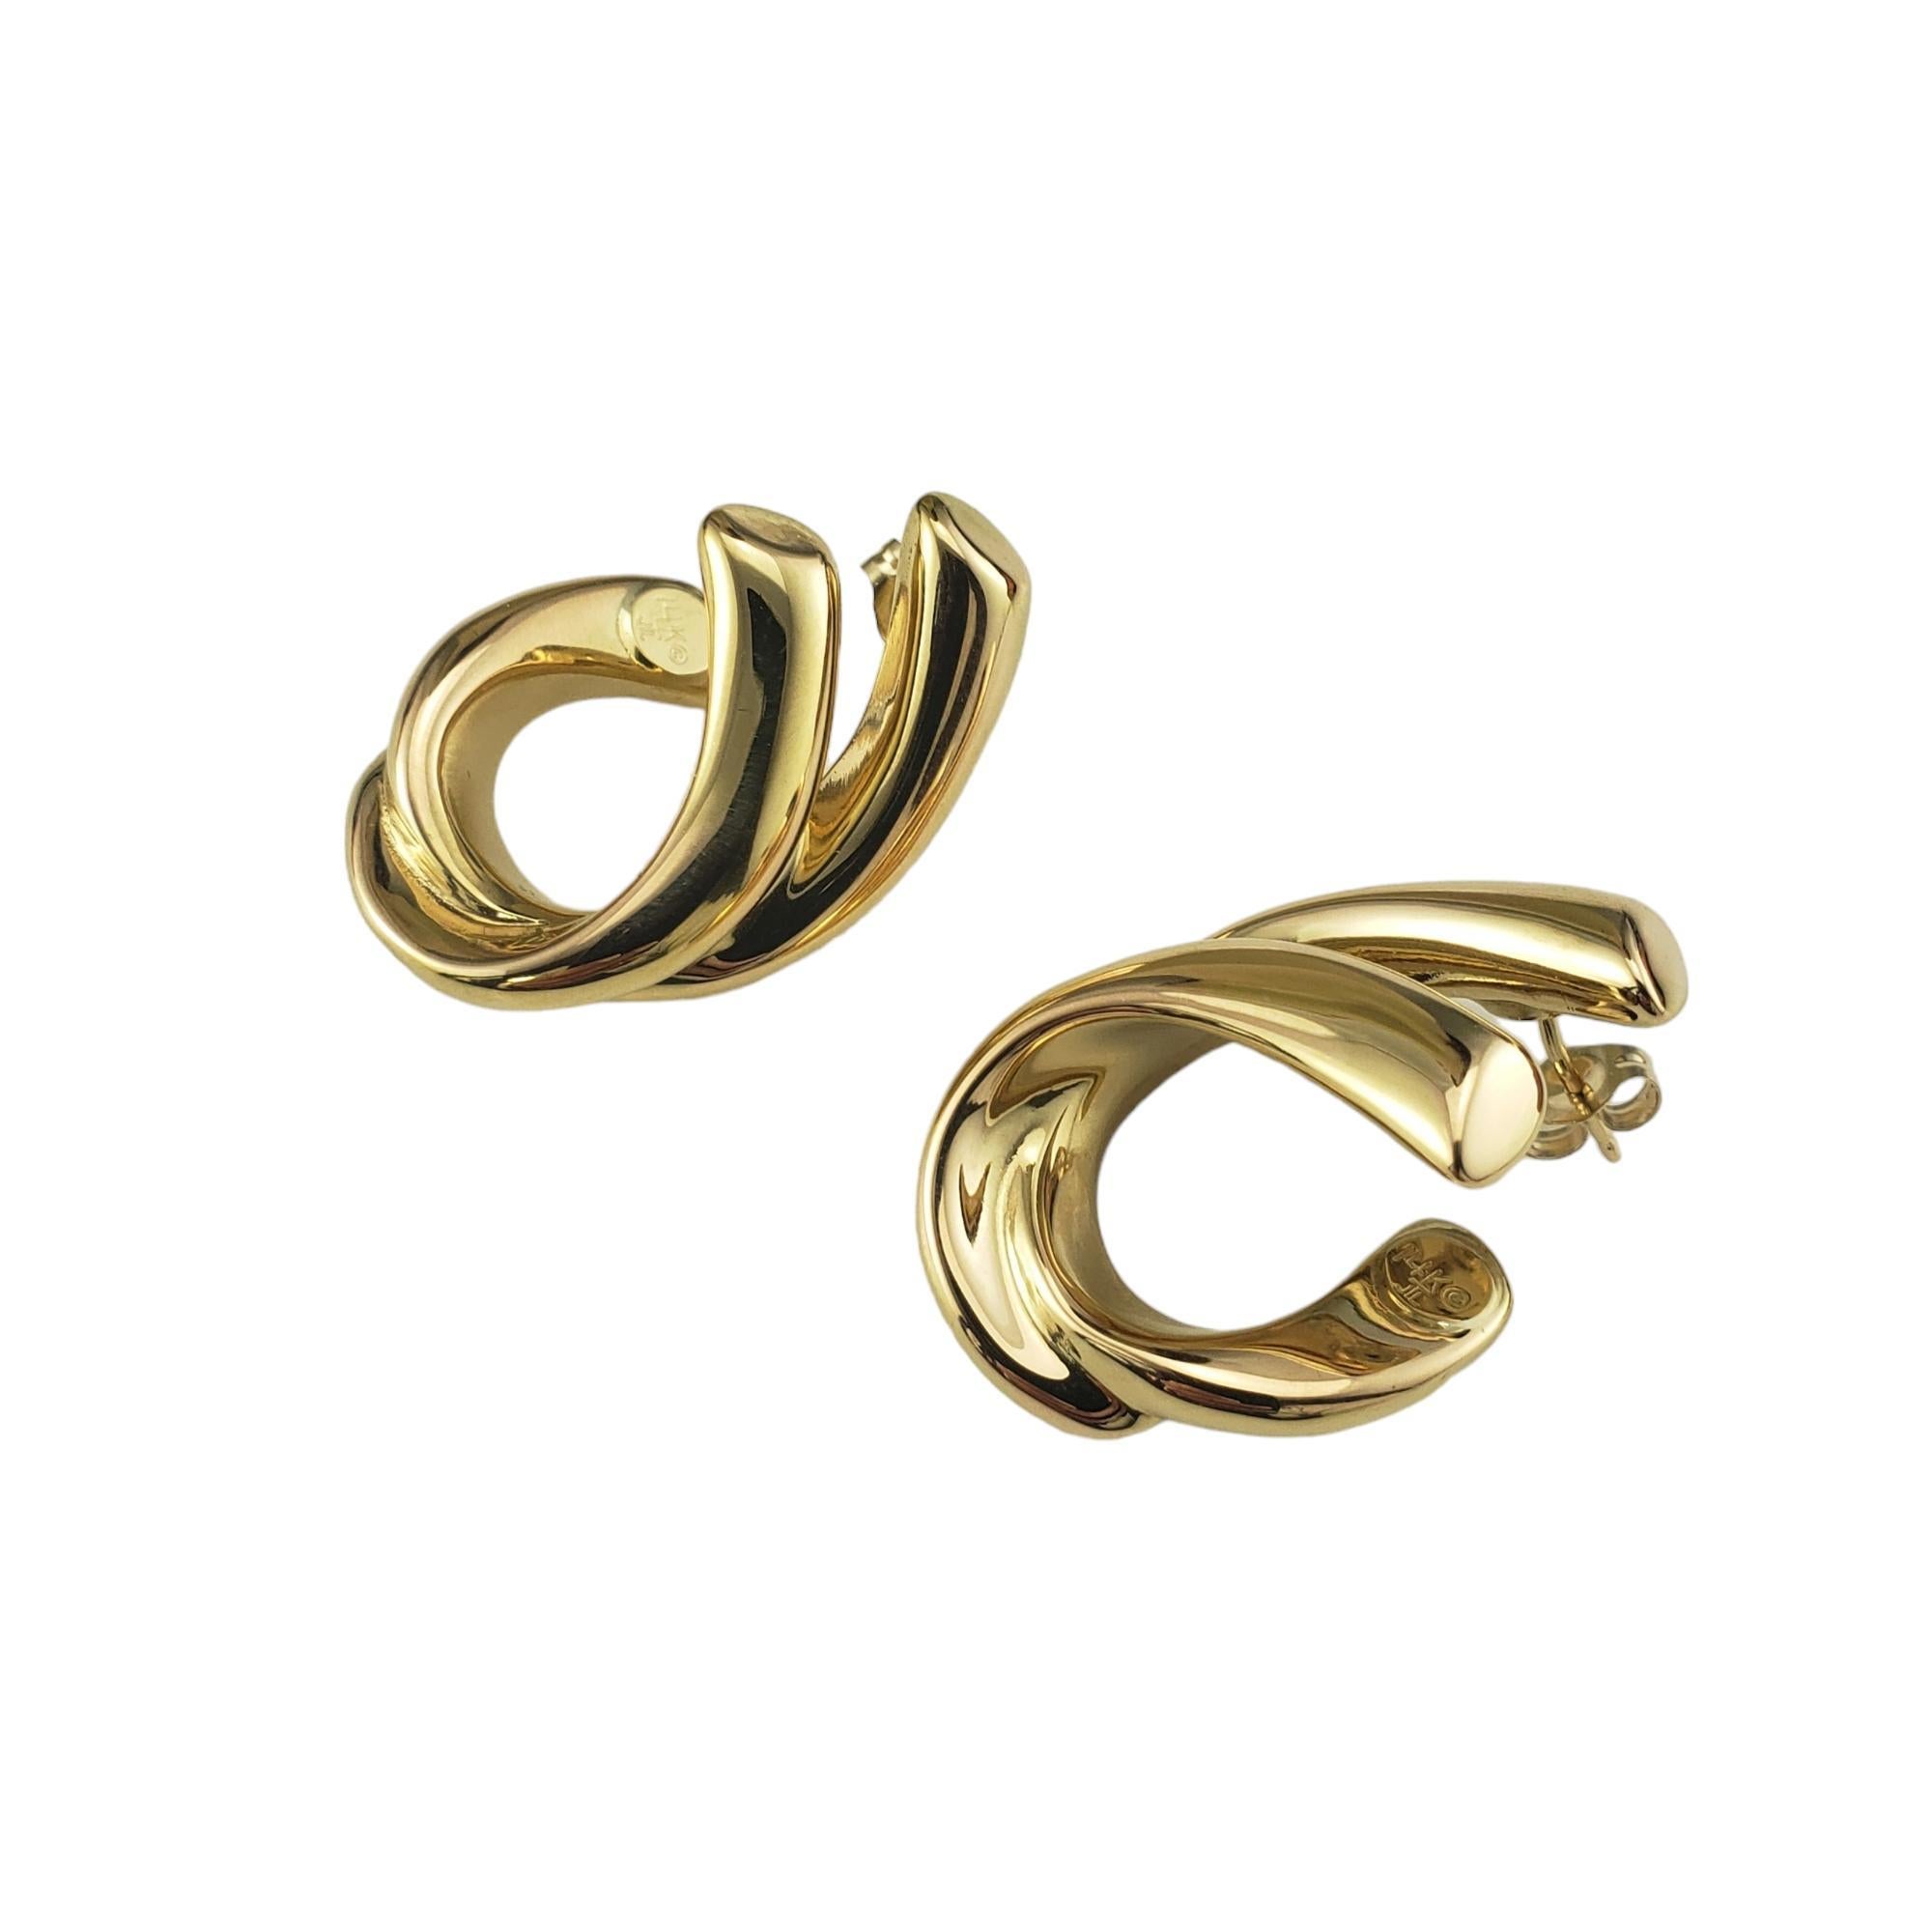 Vintage 14 Karat Yellow Gold Ribbon Hoop Earrings-

These elegant earrings are crafted in meticulously detailed 14K yellow gold.  Push back closures.

Size: 29 mm x 10 mm

Stamped: 14K

Weight: 2.1 dwt./ 3.2 gr.

Very good condition, professionally